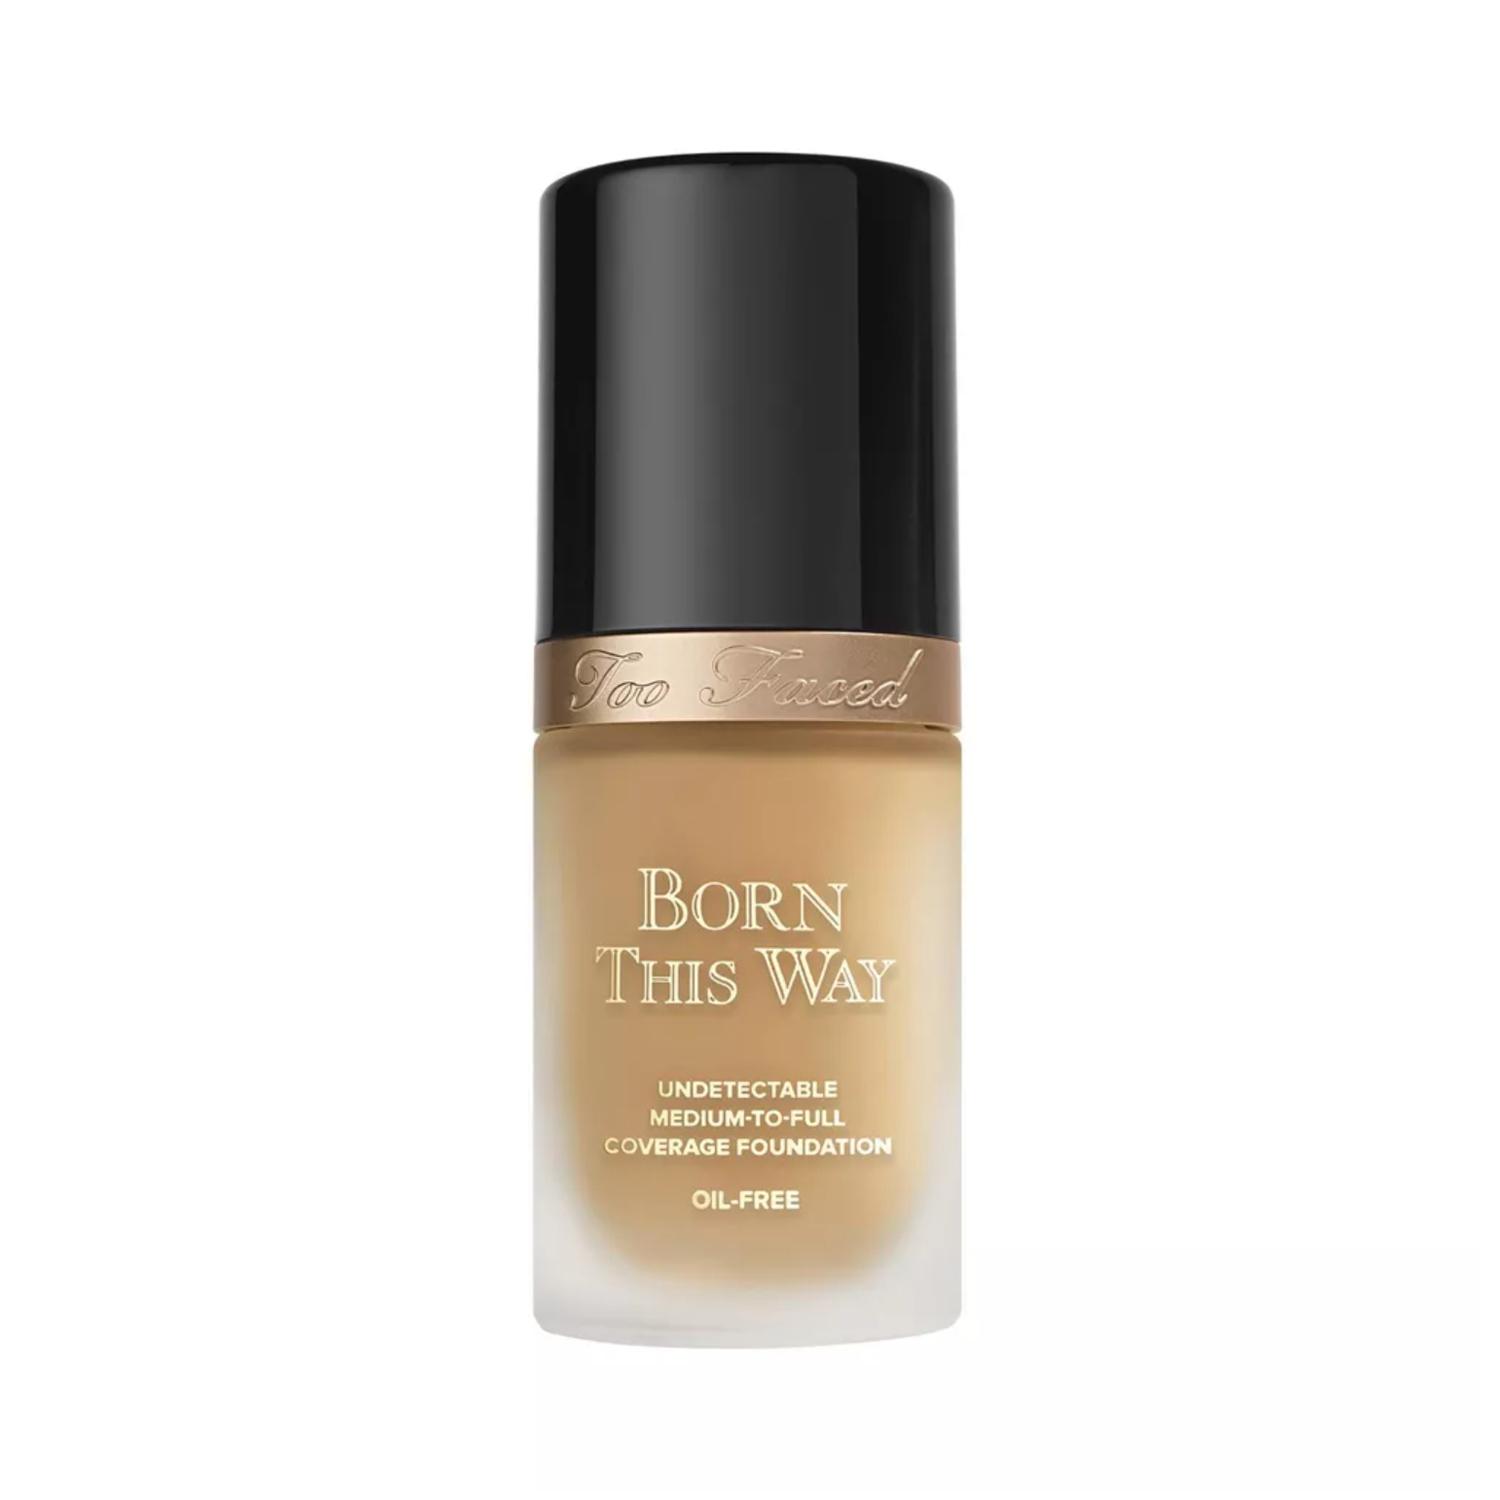 too faced born this way foundation - seashell (30ml)